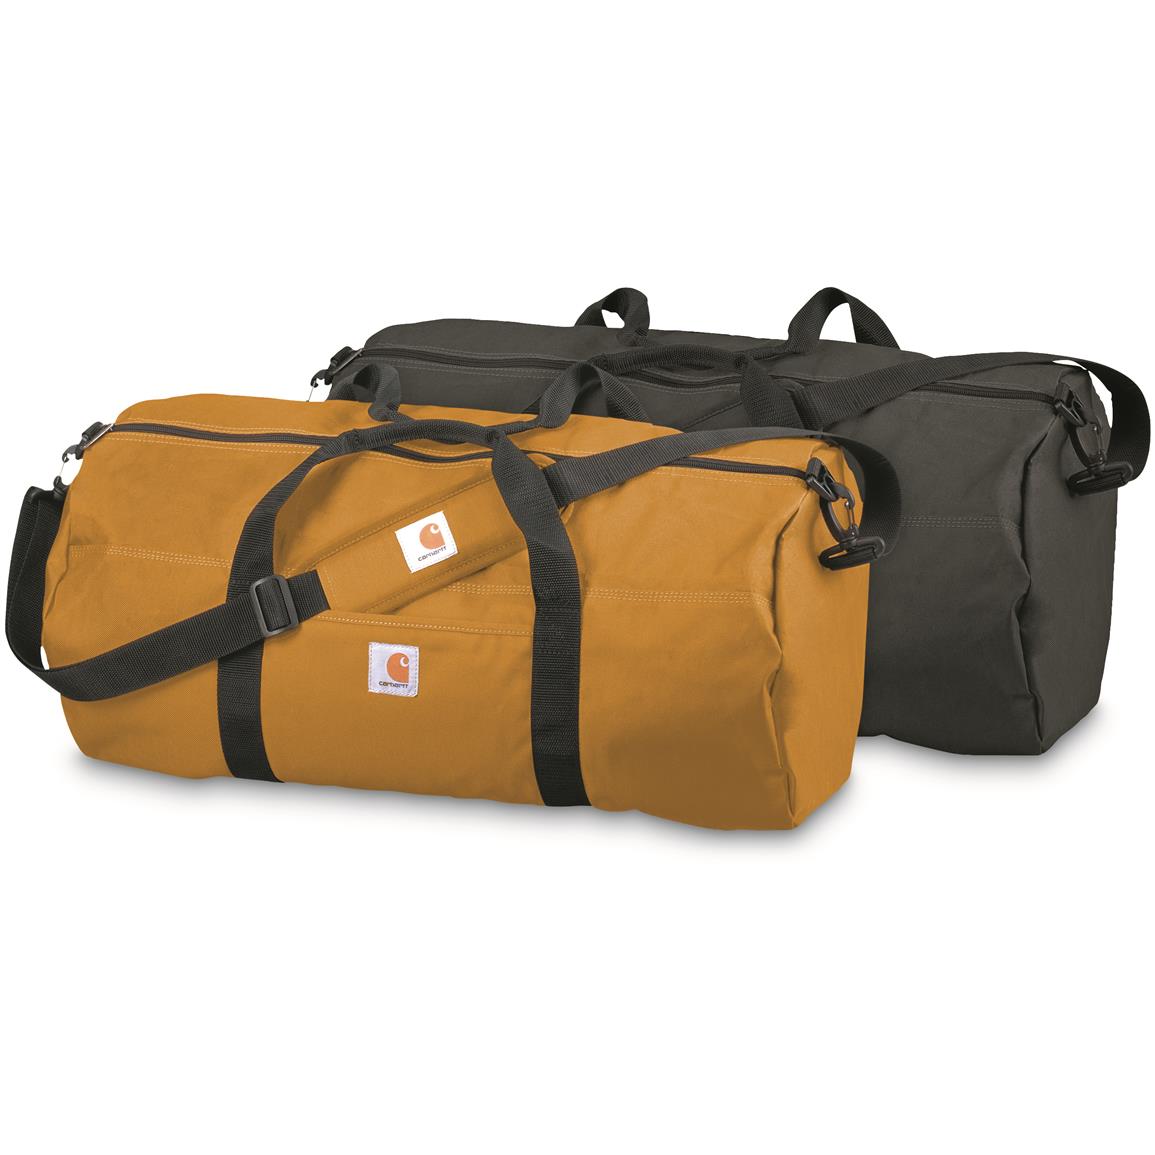 Carhartt Trade Series Large Duffel Bag and Utility Pouch - 680831, Dry Bags & Sacks at Sportsman ...